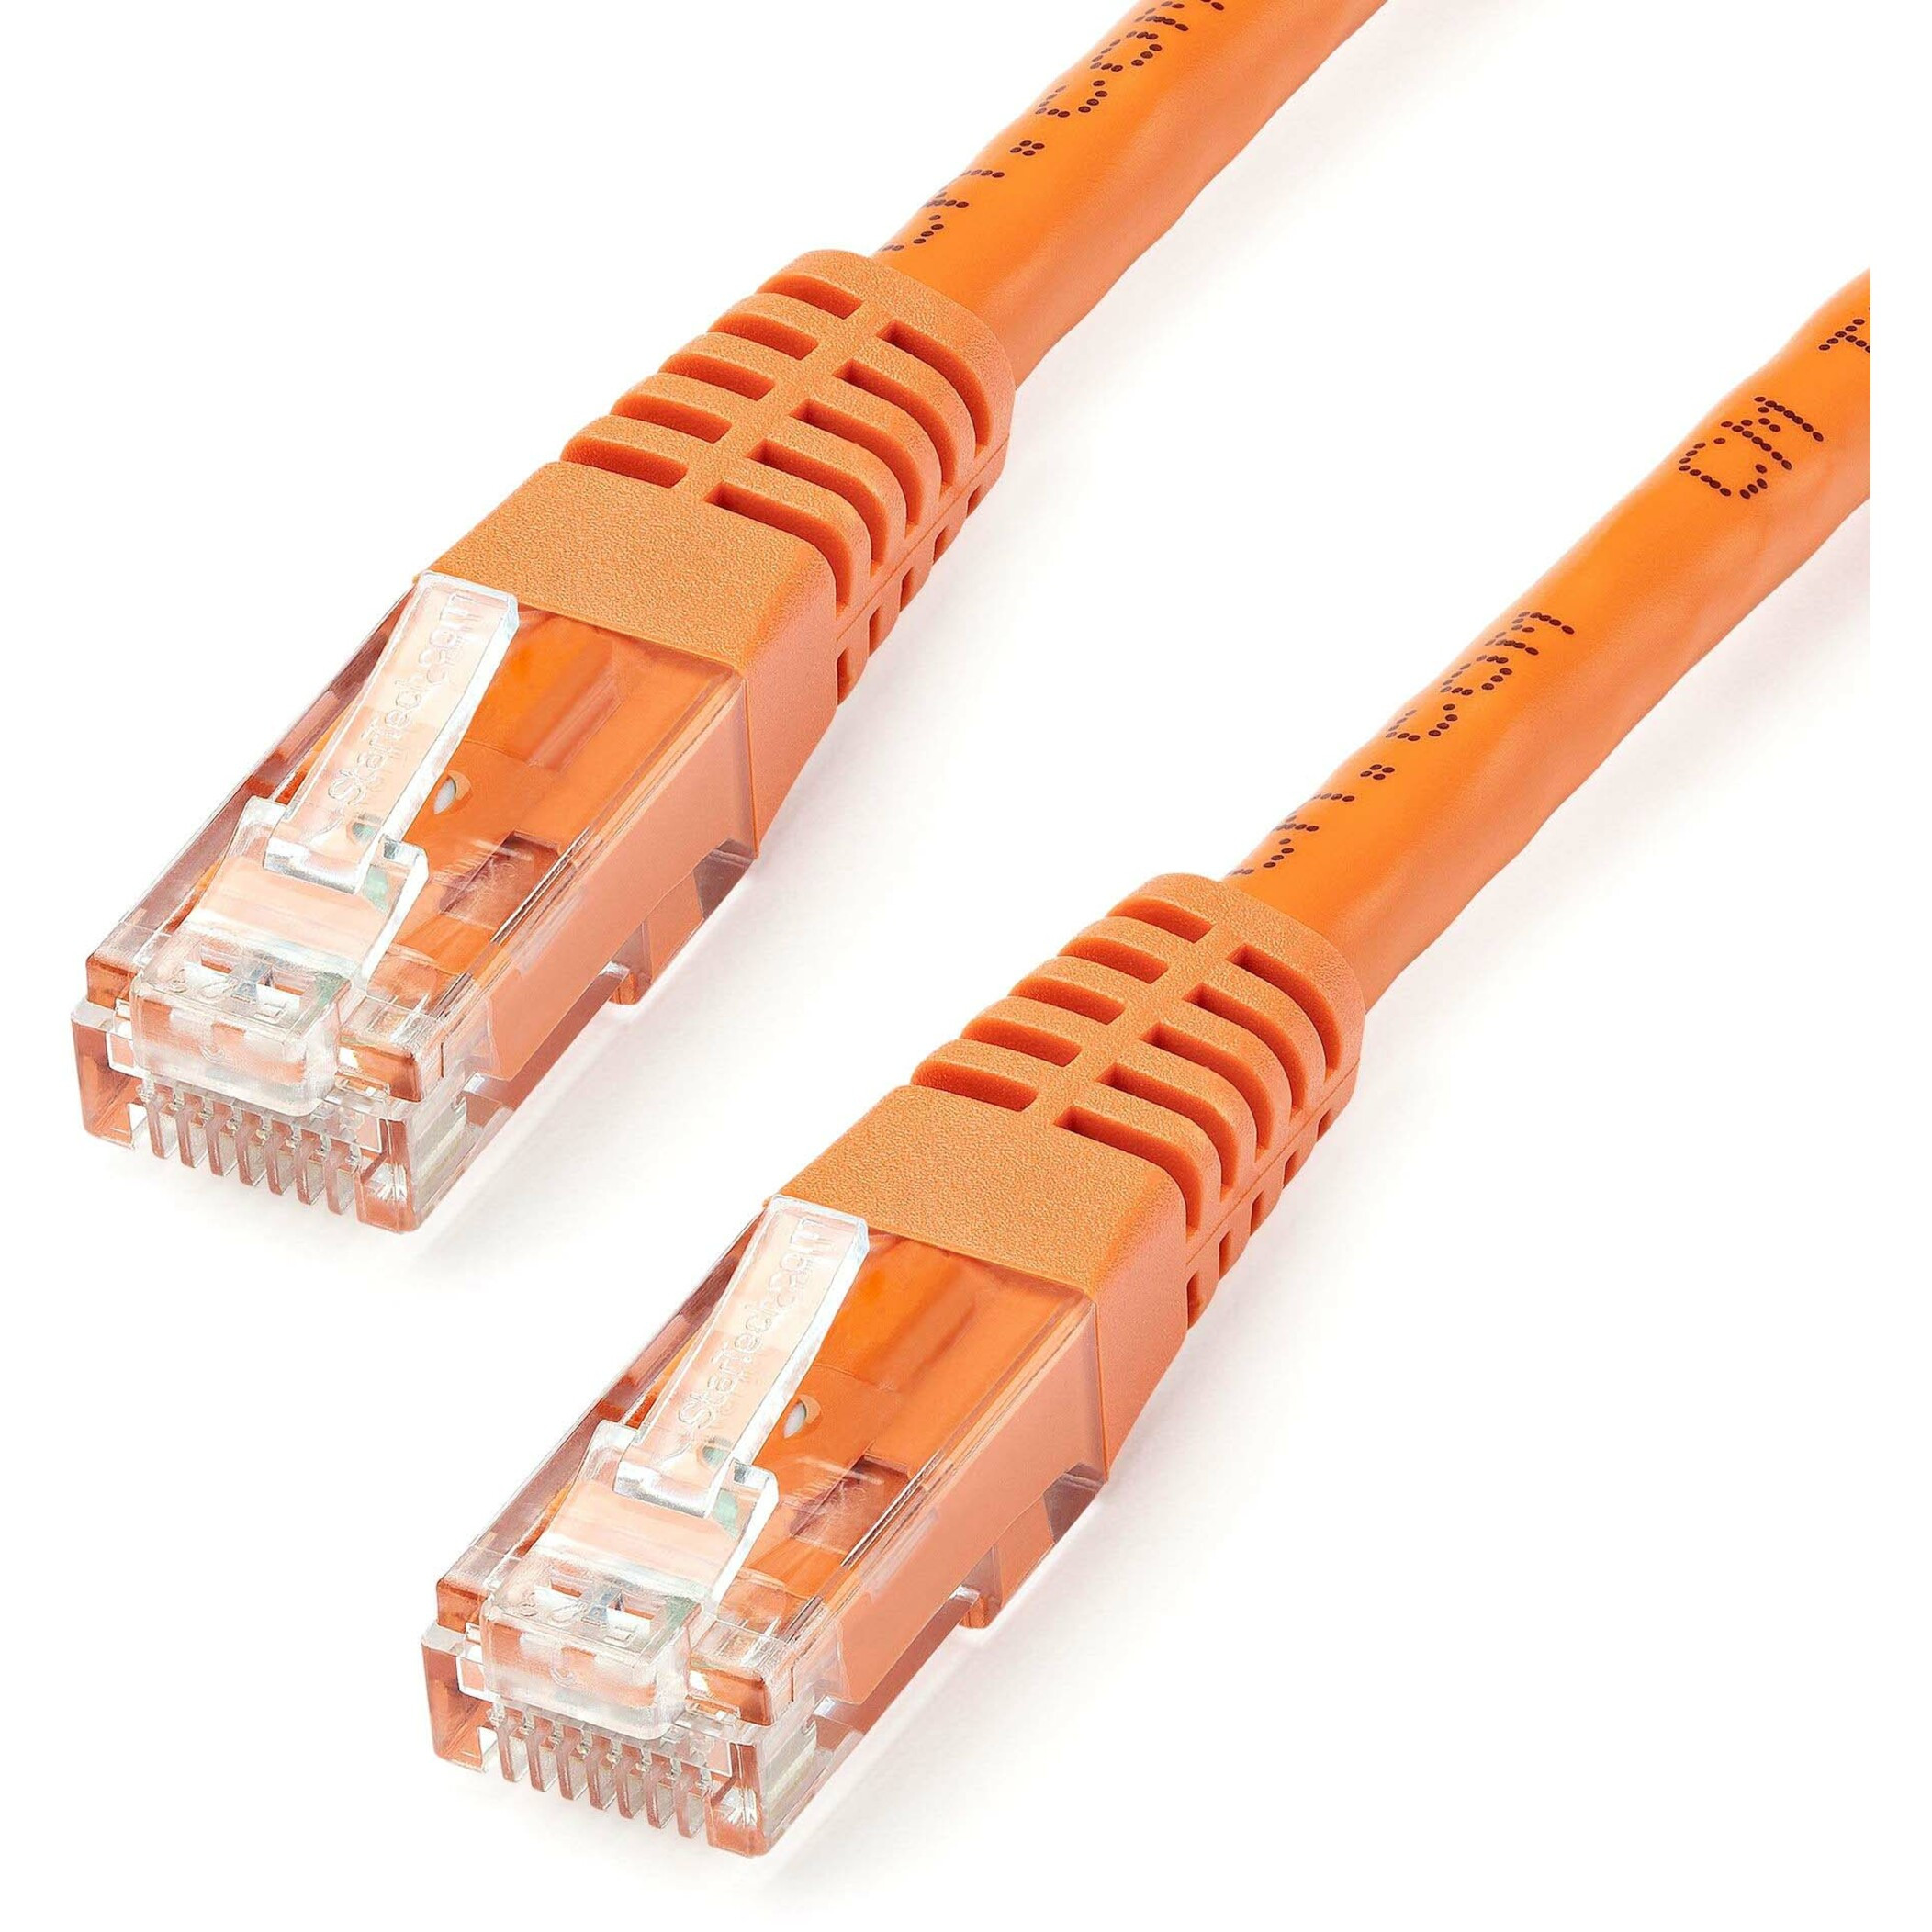 Startech .com 50ft CAT6 Ethernet CableOrange Molded Gigabit100W PoE UTP 650MHzCategory 6 Patch Cord UL Certified Wiring/TIA50ft O… C6PATCH50OR